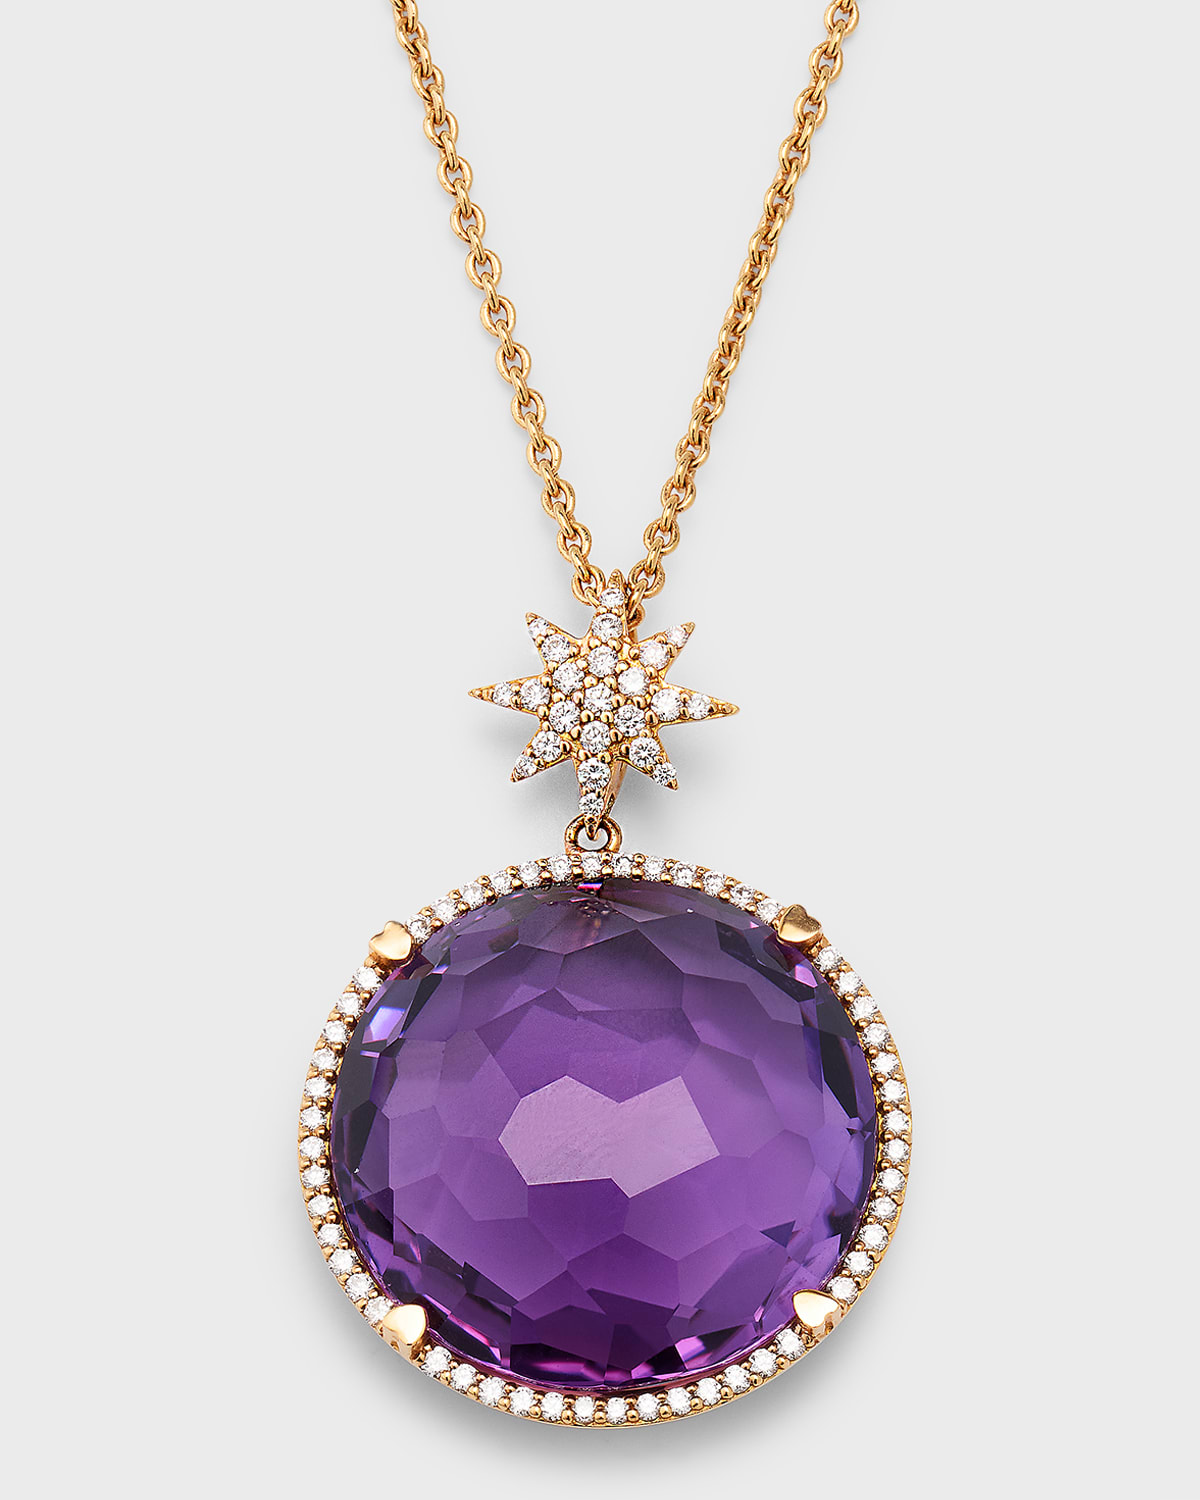 18K Rose Gold Round Amethyst and Diamond Necklace with Star Bail